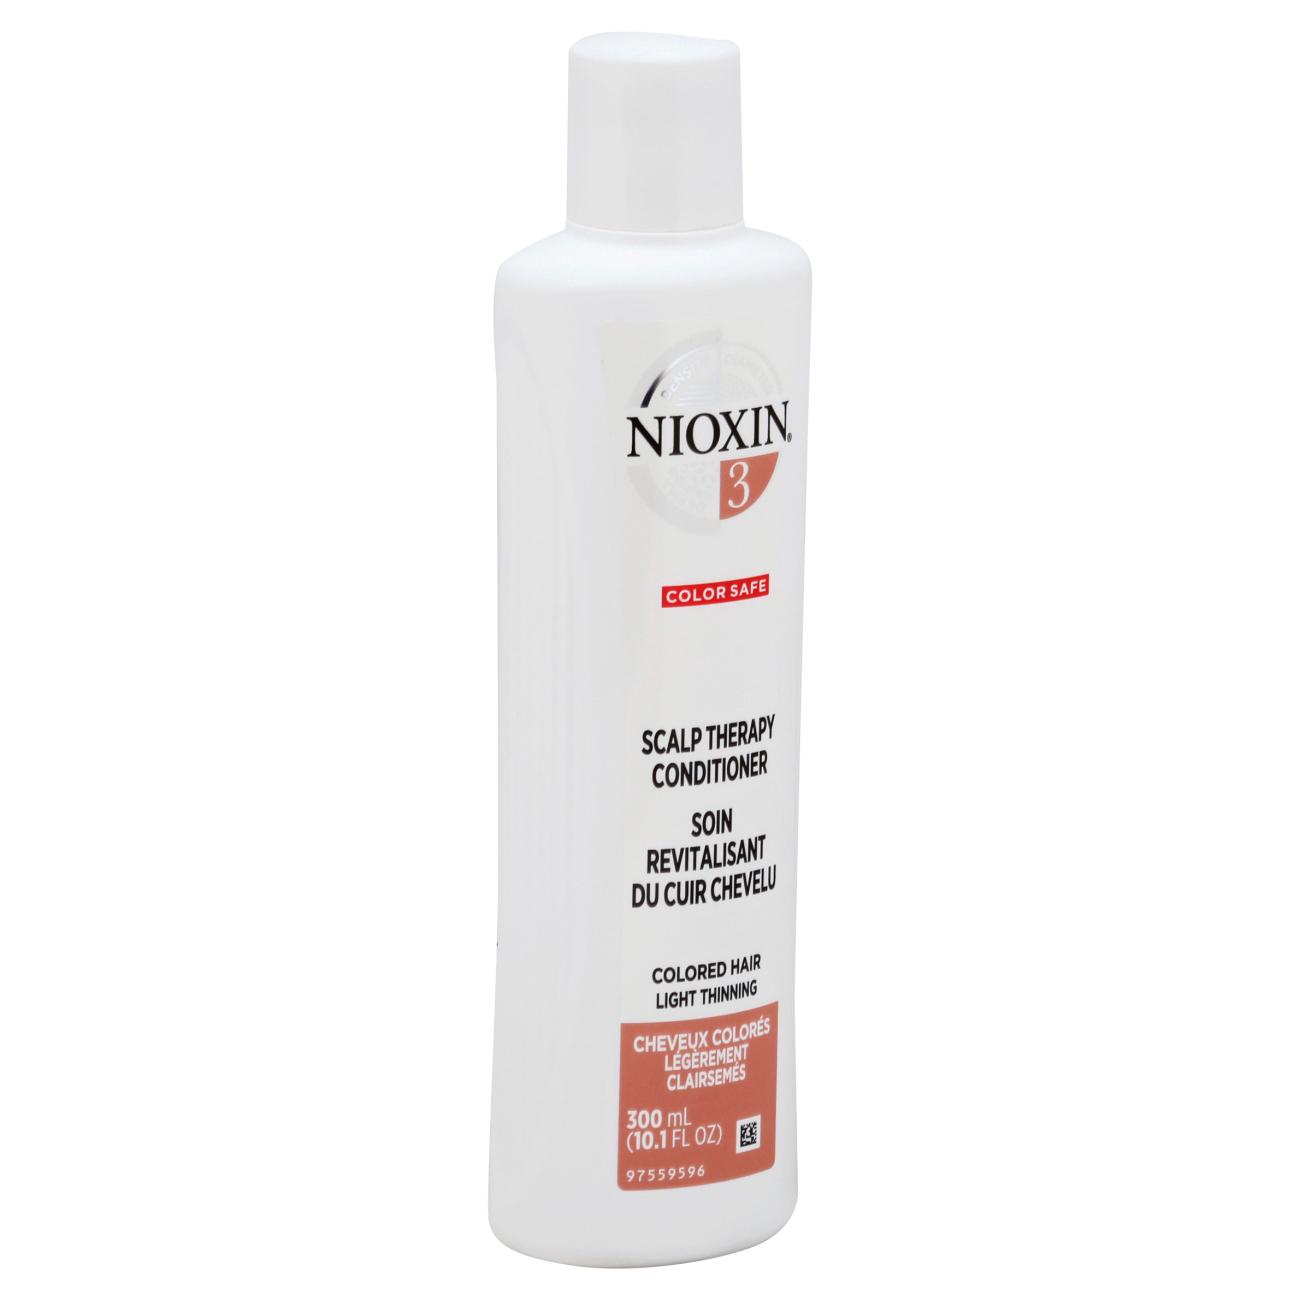 Nioxin System 3 Scalp Therapy Conditioner; image 1 of 2